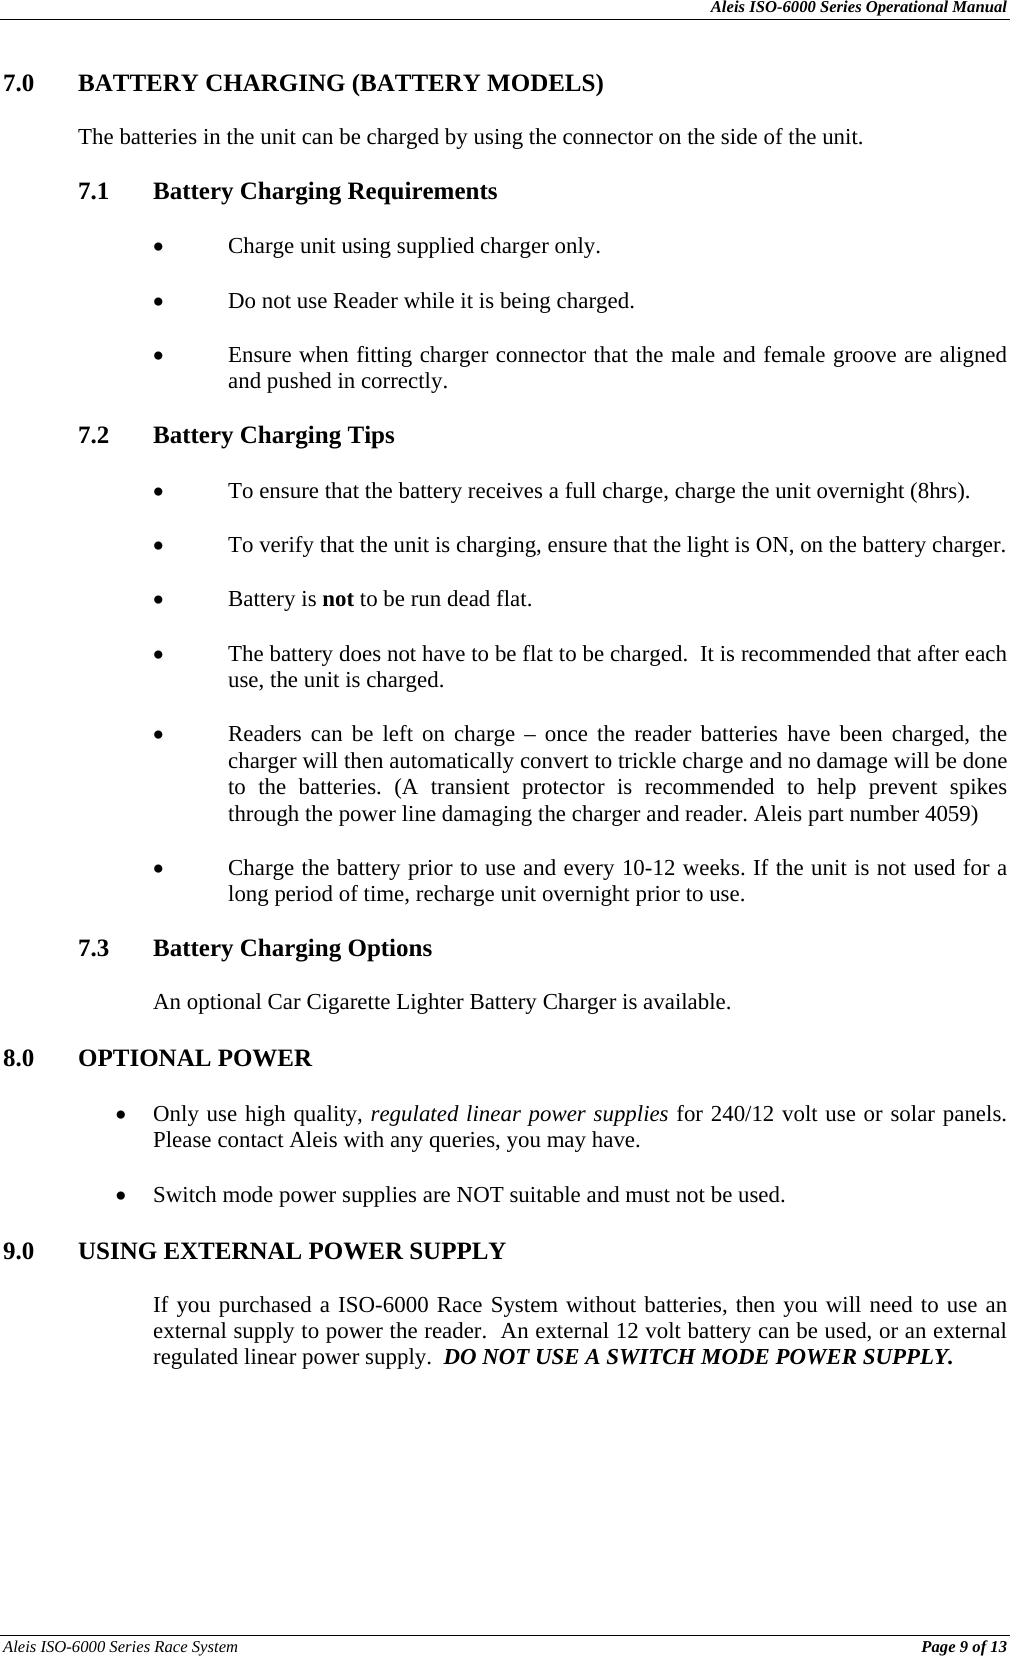 Aleis ISO-6000 Series Operational Manual Aleis ISO-6000 Series Race System          Page 9 of 13 7.0 BATTERY CHARGING (BATTERY MODELS)  The batteries in the unit can be charged by using the connector on the side of the unit.  7.1  Battery Charging Requirements  • Charge unit using supplied charger only.  • Do not use Reader while it is being charged.  • Ensure when fitting charger connector that the male and female groove are aligned and pushed in correctly.  7.2  Battery Charging Tips  • To ensure that the battery receives a full charge, charge the unit overnight (8hrs).  • To verify that the unit is charging, ensure that the light is ON, on the battery charger.  • Battery is not to be run dead flat.  • The battery does not have to be flat to be charged.  It is recommended that after each use, the unit is charged.  • Readers can be left on charge – once the reader batteries have been charged, the charger will then automatically convert to trickle charge and no damage will be done to the batteries. (A transient protector is recommended to help prevent spikes through the power line damaging the charger and reader. Aleis part number 4059)  • Charge the battery prior to use and every 10-12 weeks. If the unit is not used for a long period of time, recharge unit overnight prior to use.  7.3  Battery Charging Options  An optional Car Cigarette Lighter Battery Charger is available.  8.0 OPTIONAL POWER  • Only use high quality, regulated linear power supplies for 240/12 volt use or solar panels.  Please contact Aleis with any queries, you may have.  • Switch mode power supplies are NOT suitable and must not be used.  9.0  USING EXTERNAL POWER SUPPLY   If you purchased a ISO-6000 Race System without batteries, then you will need to use an external supply to power the reader.  An external 12 volt battery can be used, or an external regulated linear power supply.  DO NOT USE A SWITCH MODE POWER SUPPLY.  